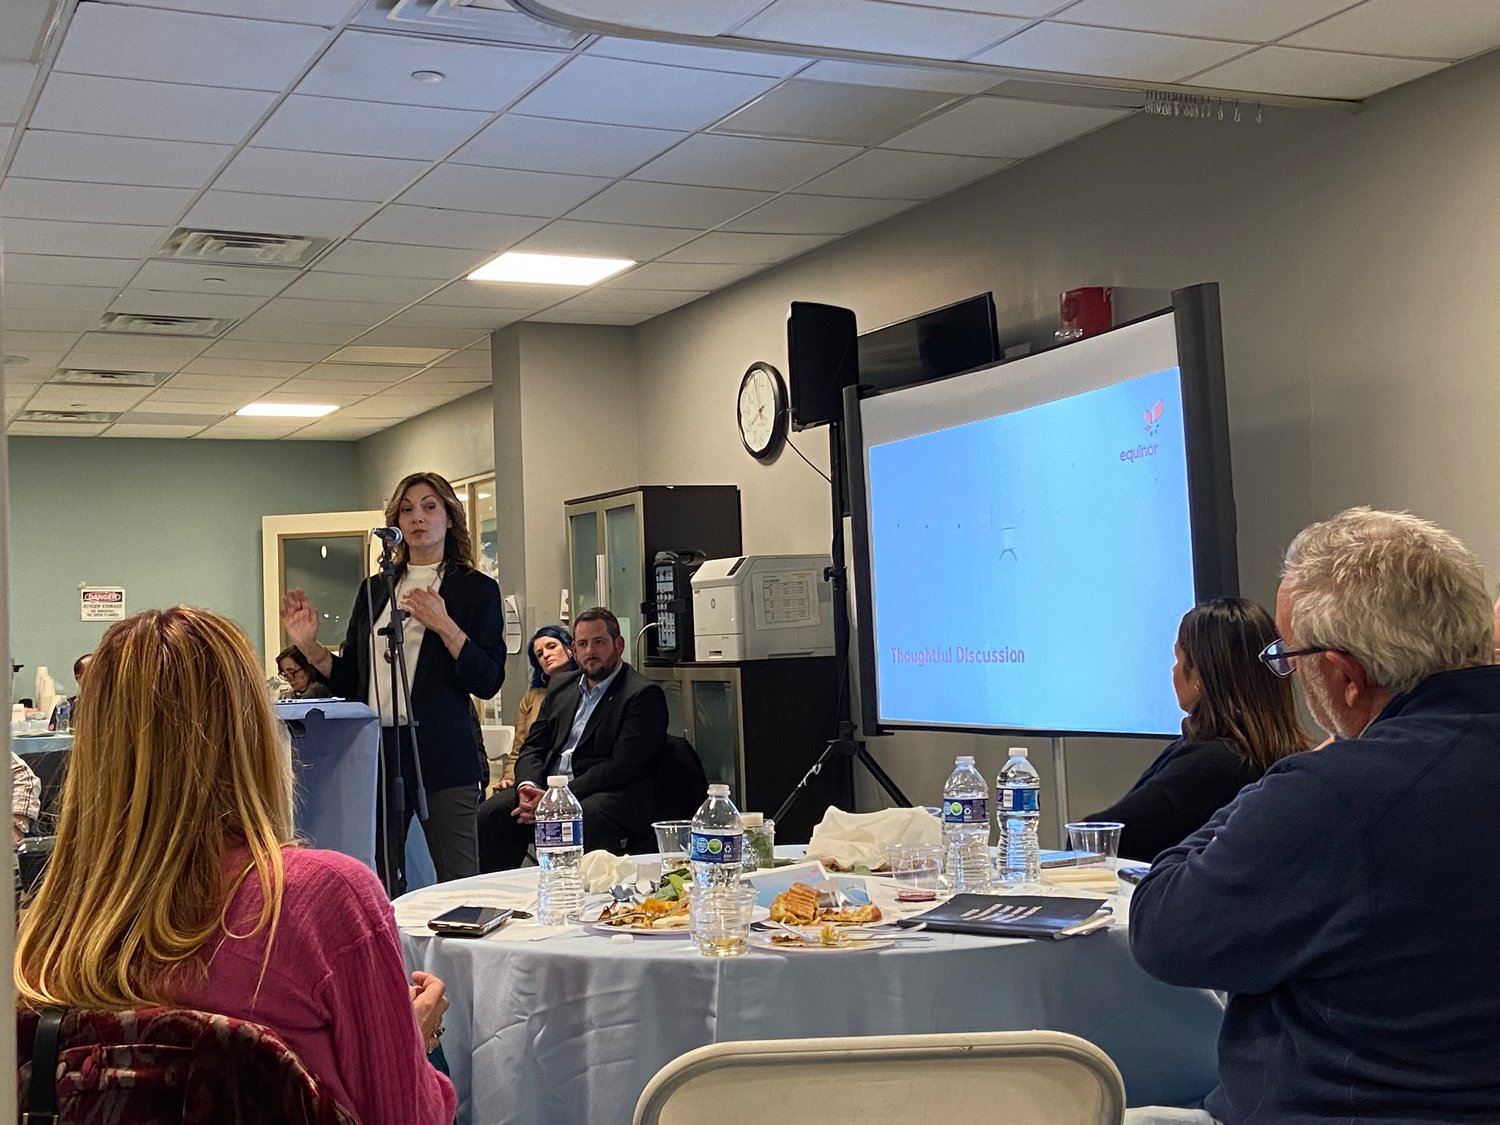 Susan Lienau, Equinor’s community engagement manager for Long Island, led part of the discussion at the company’s presentation to the Chamber of Commerce.